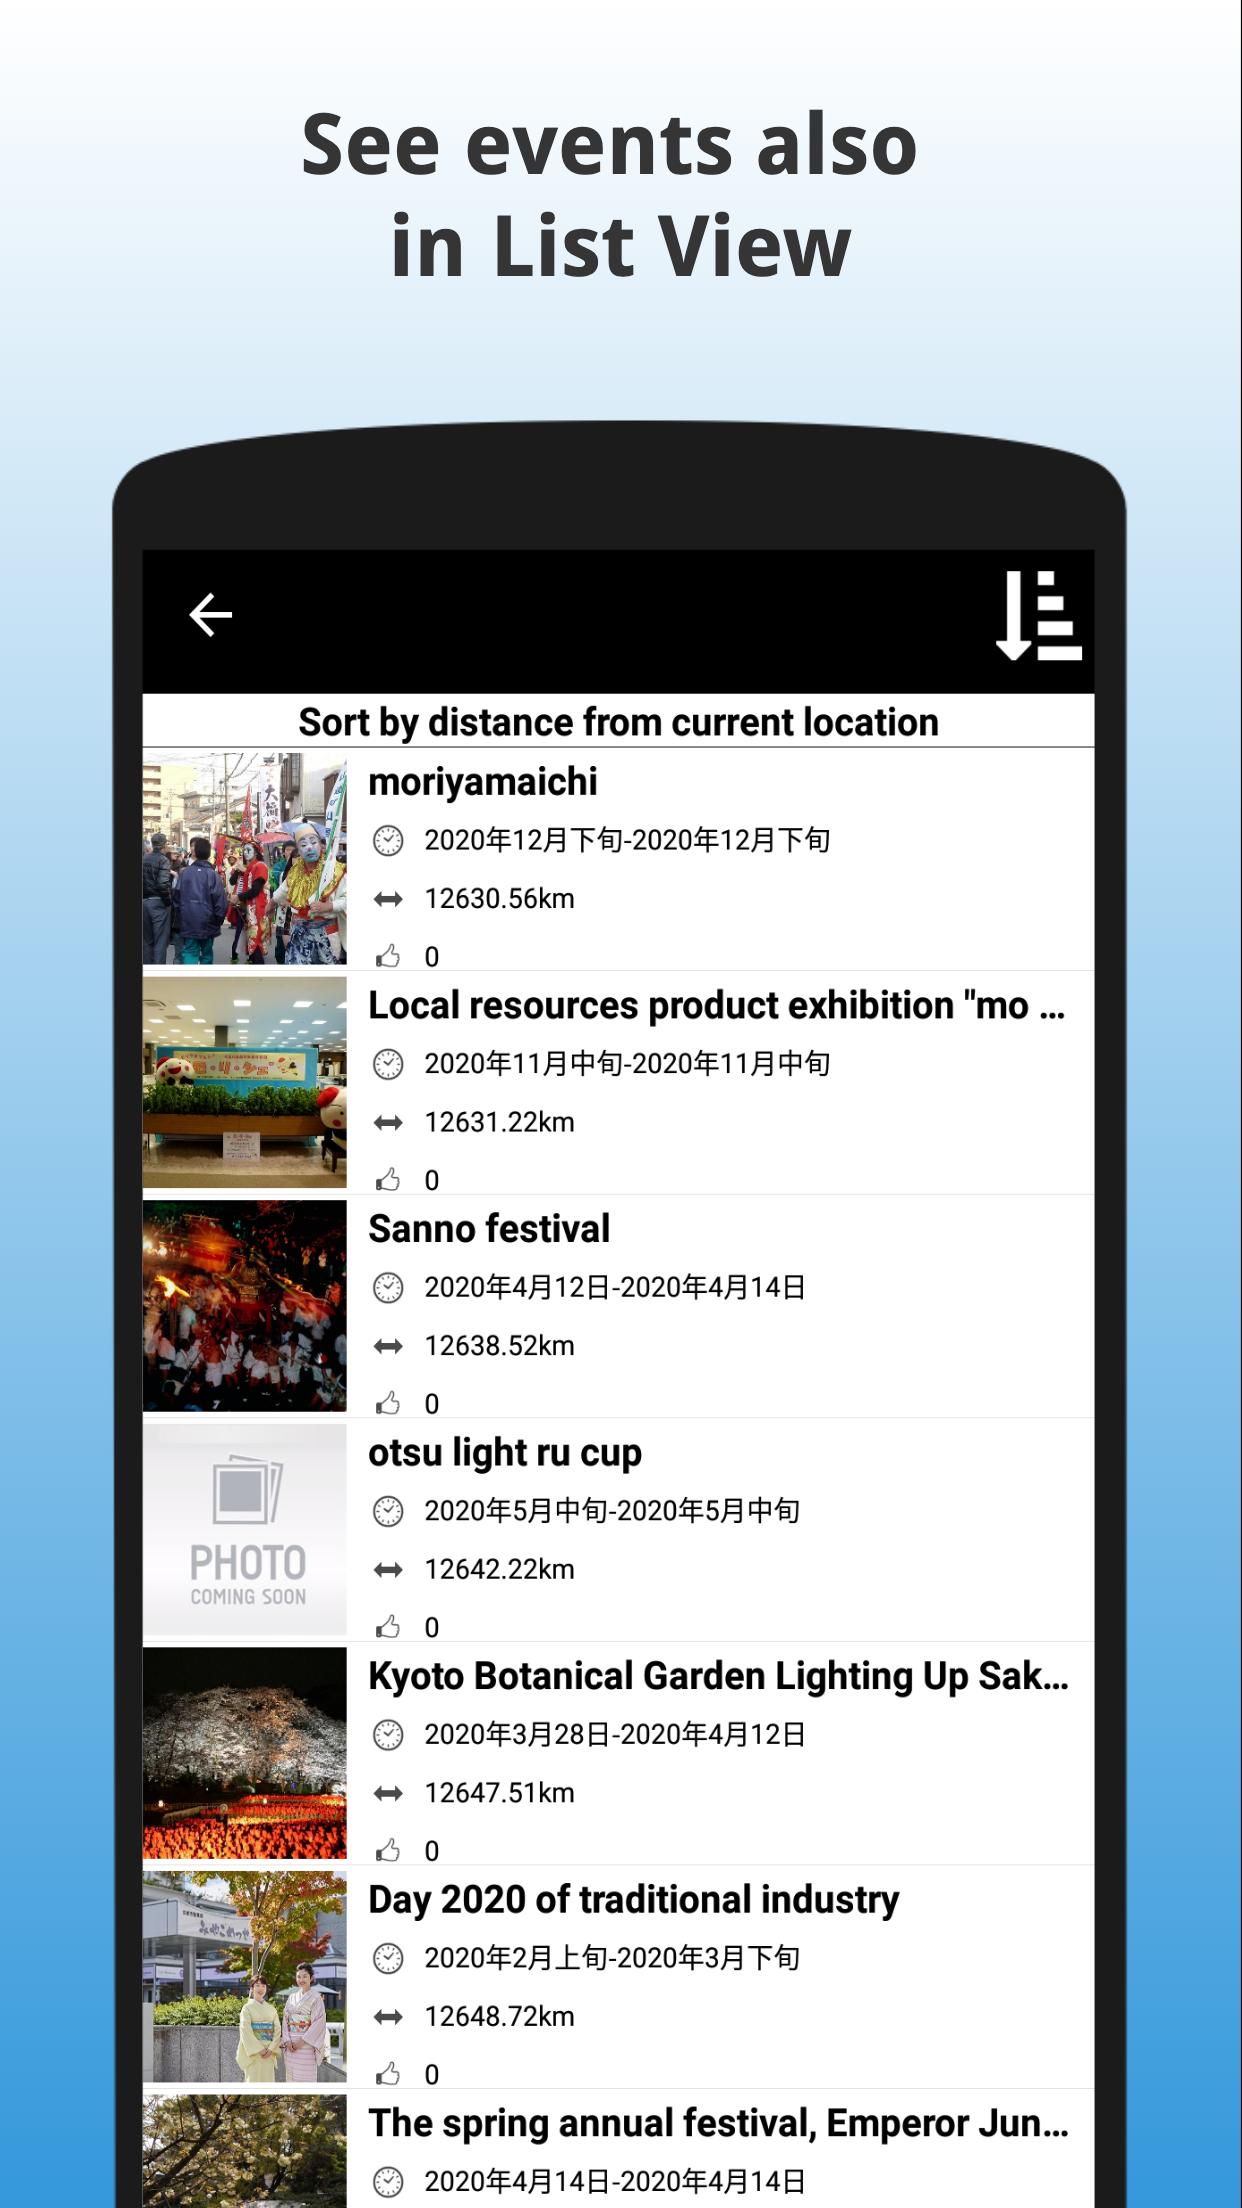 EVENTA - Search & Post Events Near You in Japan 1.0.15 Screenshot 5